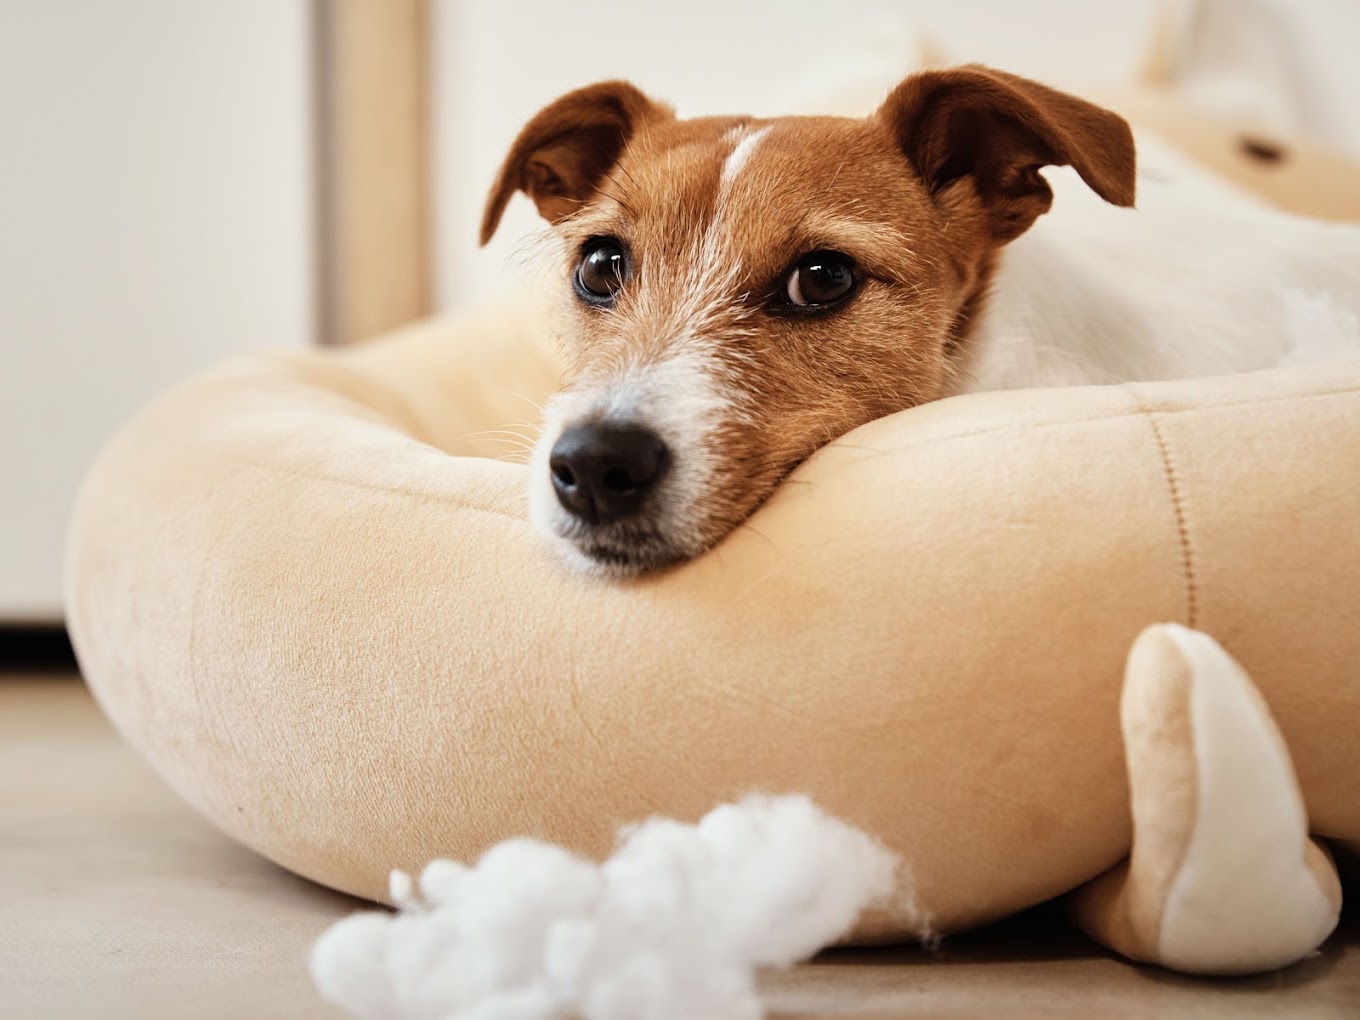 your dog’s unwanted behavior